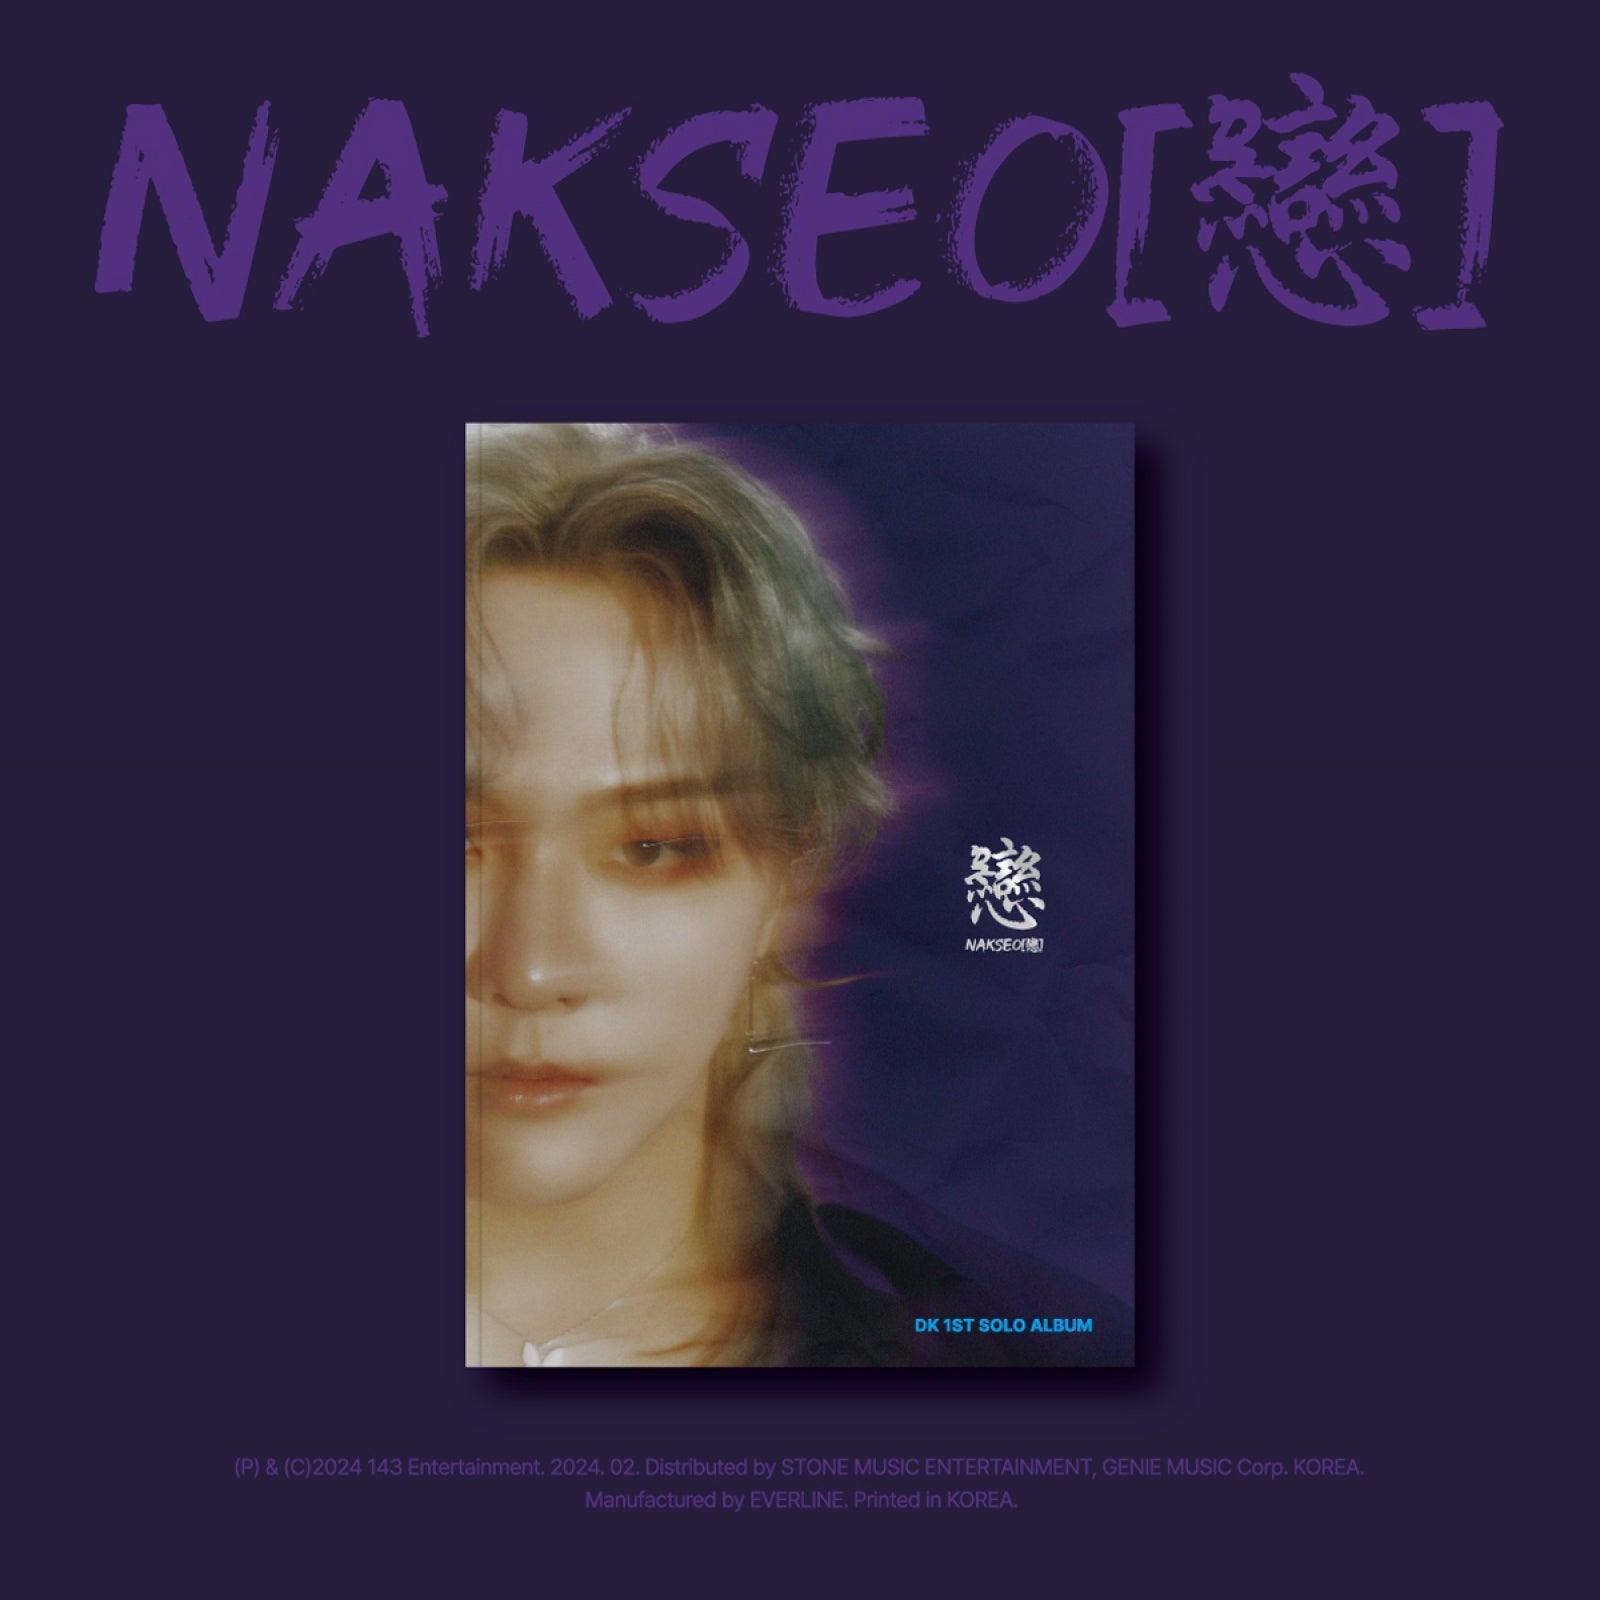 DK - NAKSEO[戀] / 1ST SOLO ALBUM - Shopping Around the World with Goodsnjoy